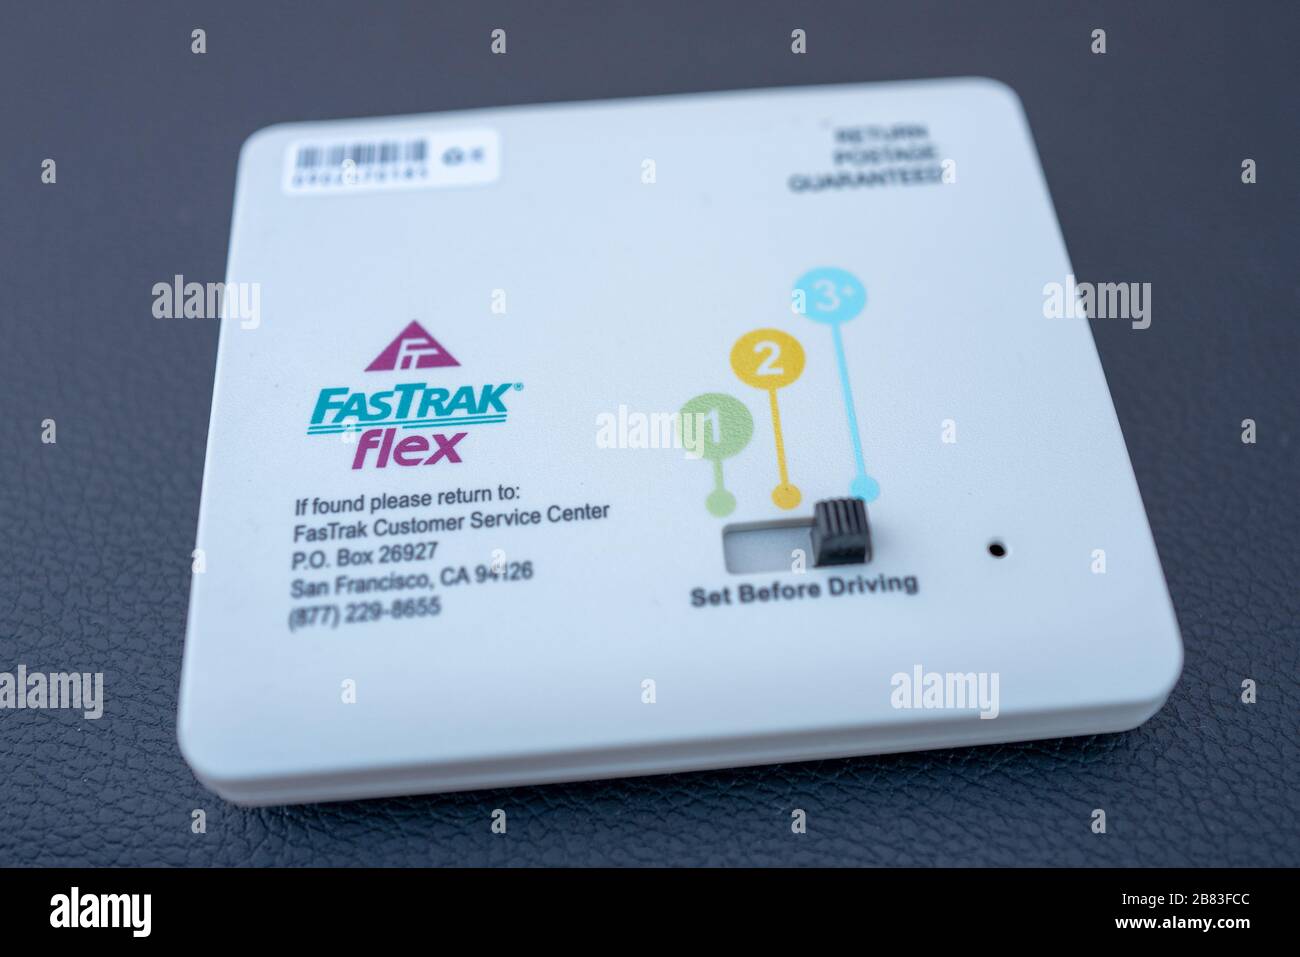 Close-up of FasTrak Flex toll transponder, used on California roads to pay for tolls, as well as to allow free travel in carpool lanes, Lafayette, California, February 7, 2020. () Stock Photo